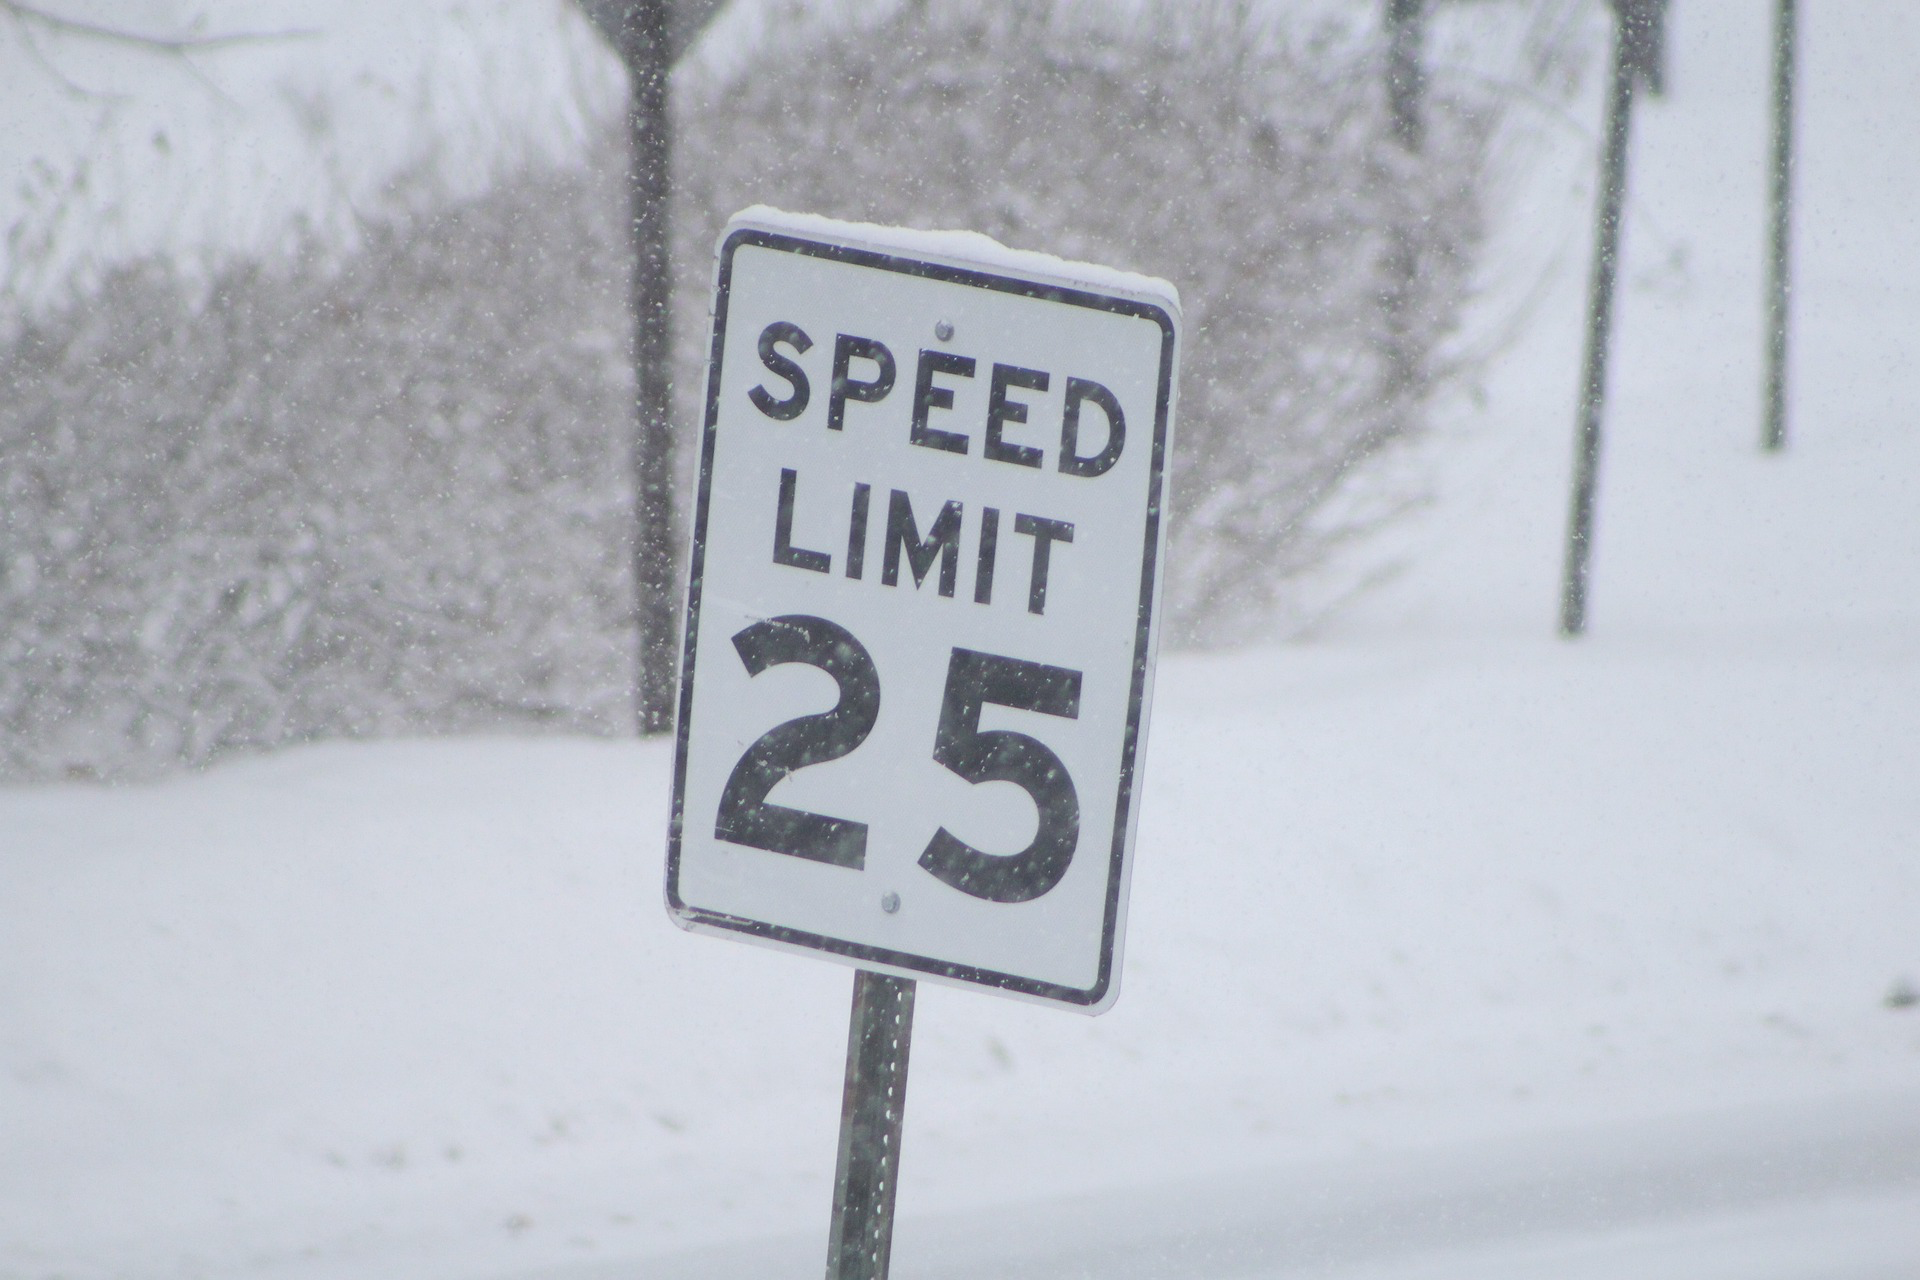 25 mph speed sign during snow storm